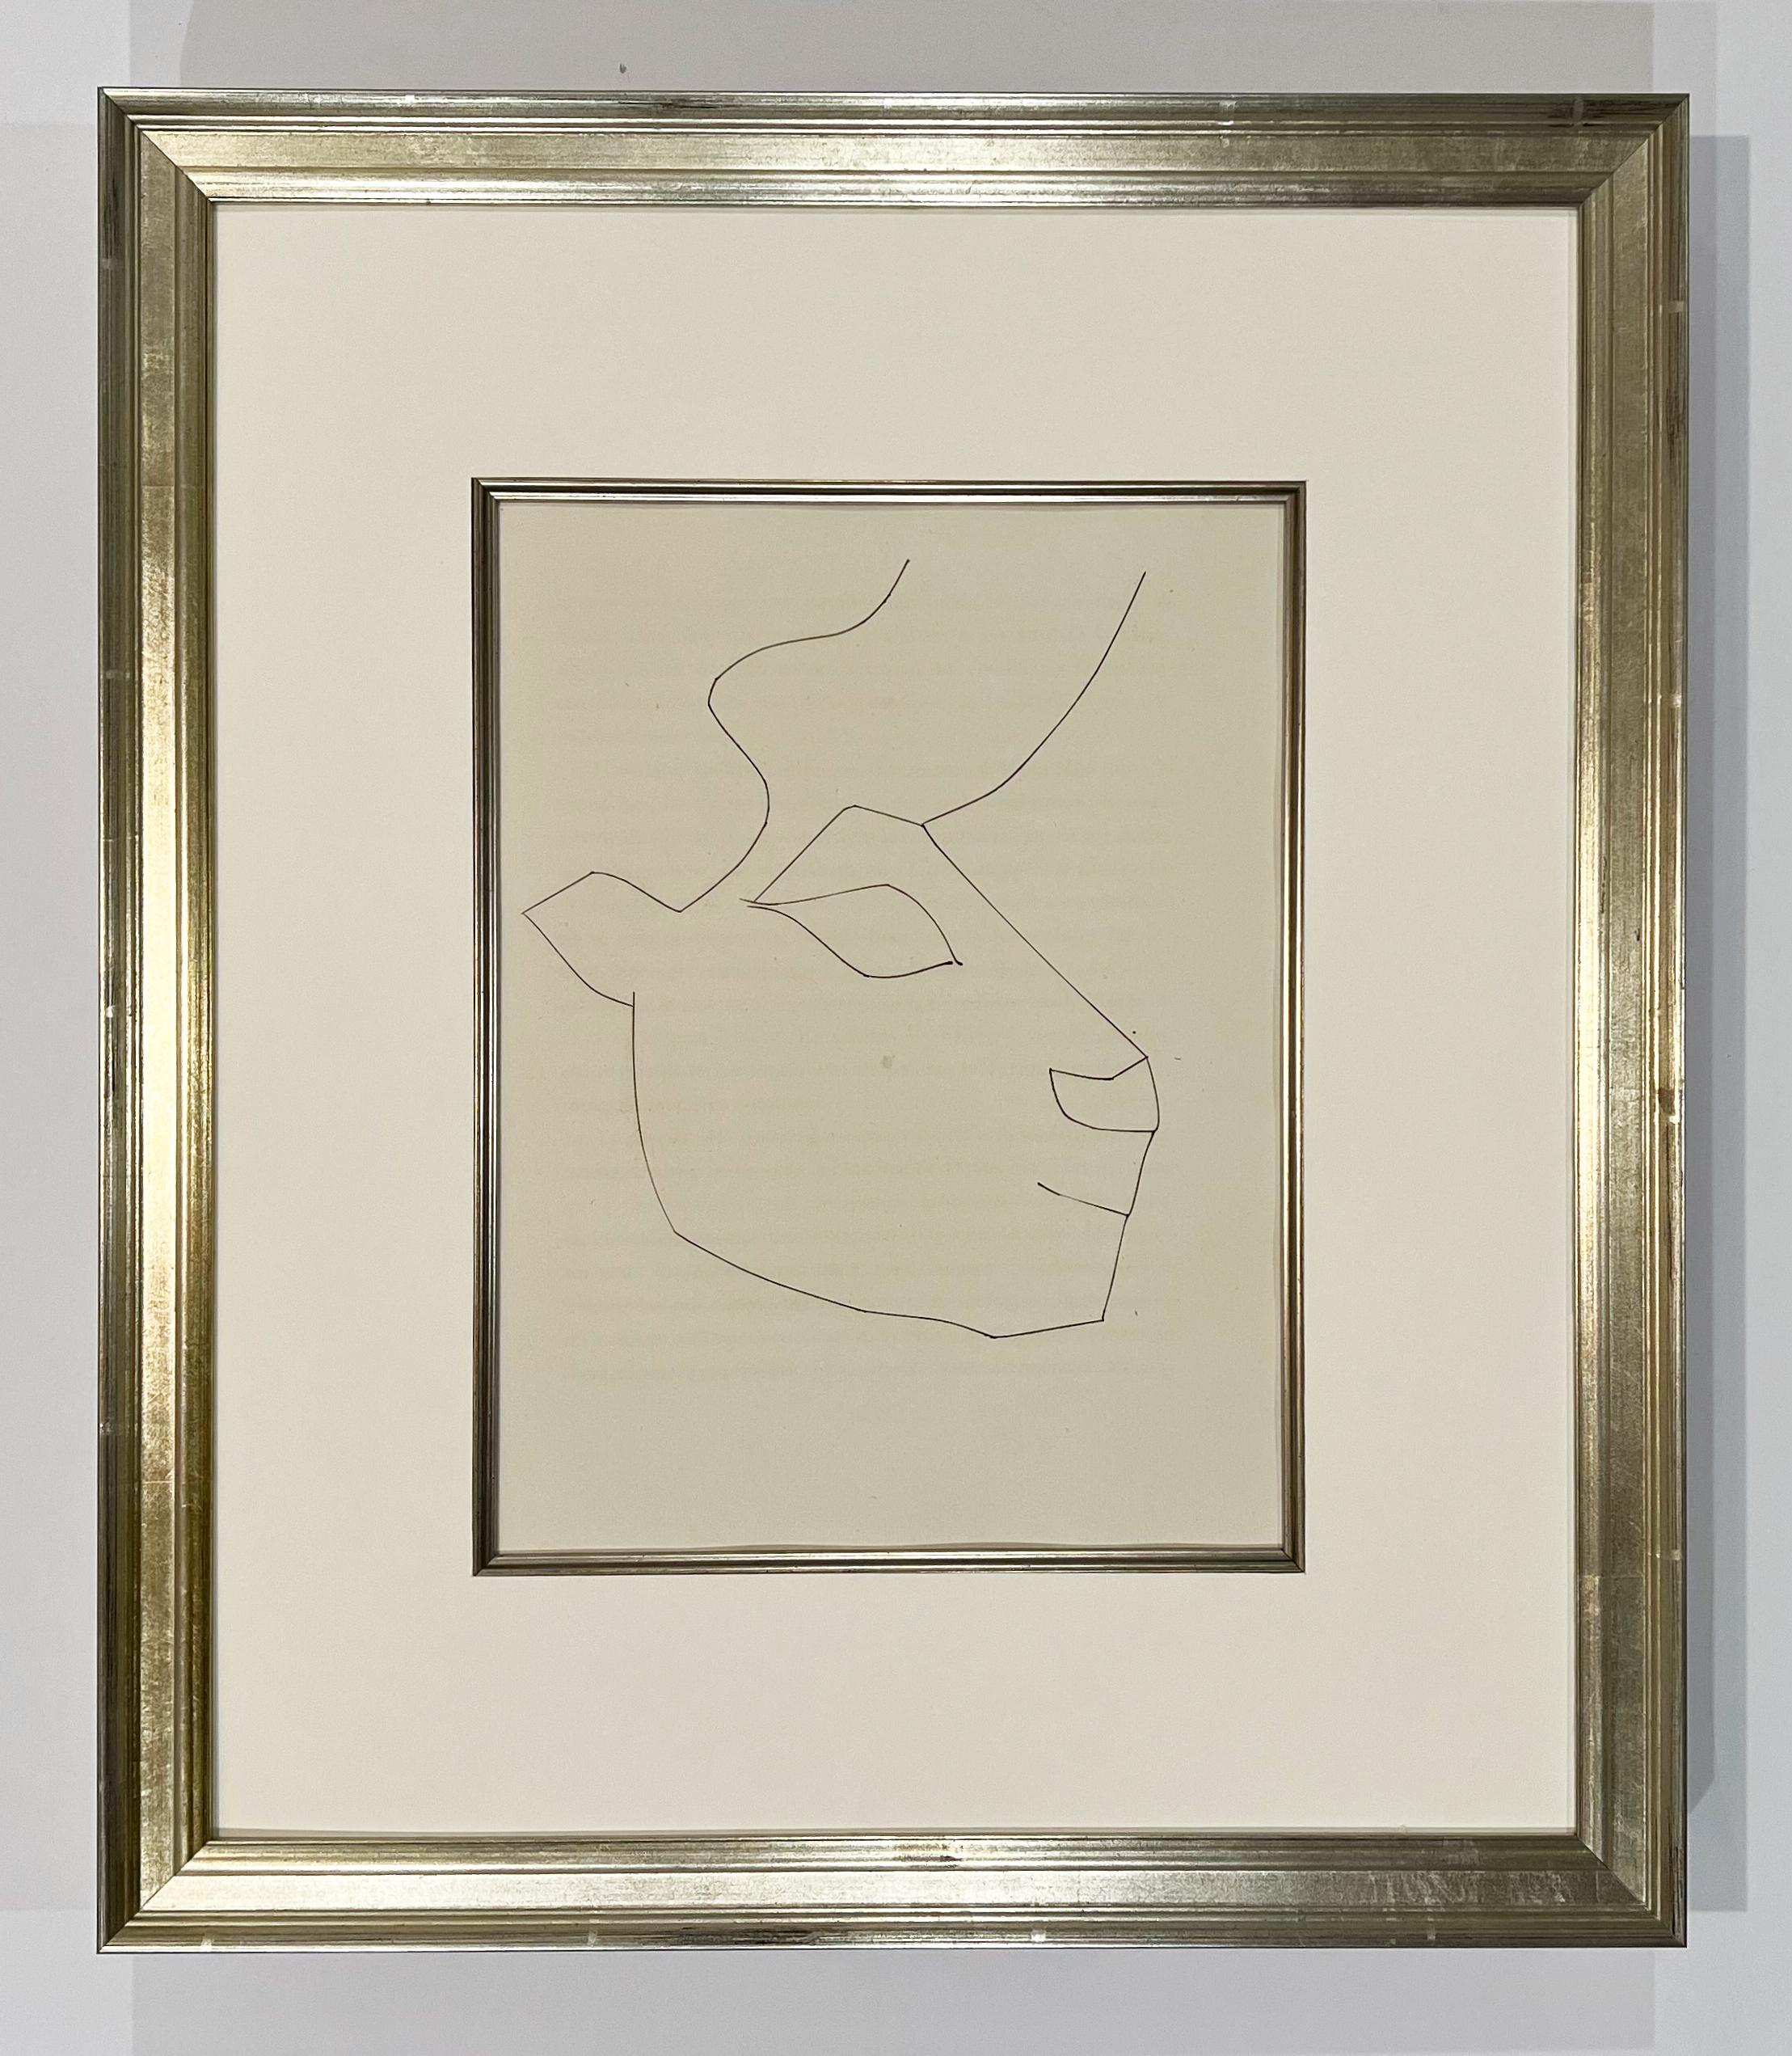 Head of a Calf (Plate XXXVI), from Carmen - Print by Pablo Picasso